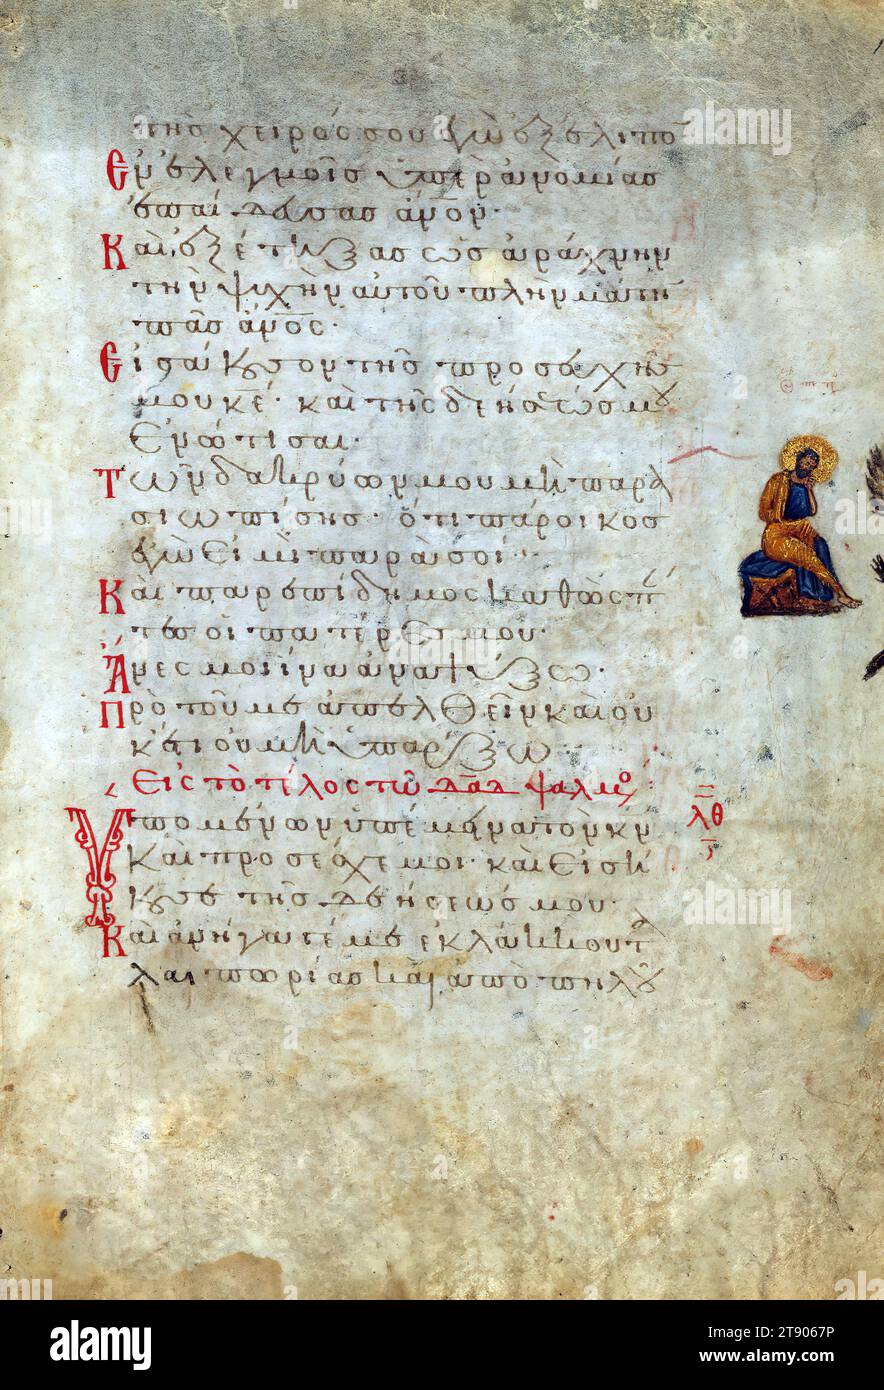 Psalter, Peter's Repentance, This manuscript, illustrated with 155 marginal paintings, is one the few surviving 'marginal psalters,' in which images provide a pictorial commentary on the Biblical text. Other examples include the Khludov Psalter, the Barberini Psalter, the Theodore Psalter, and a Cyrillic psalter made in Kiev Stock Photo